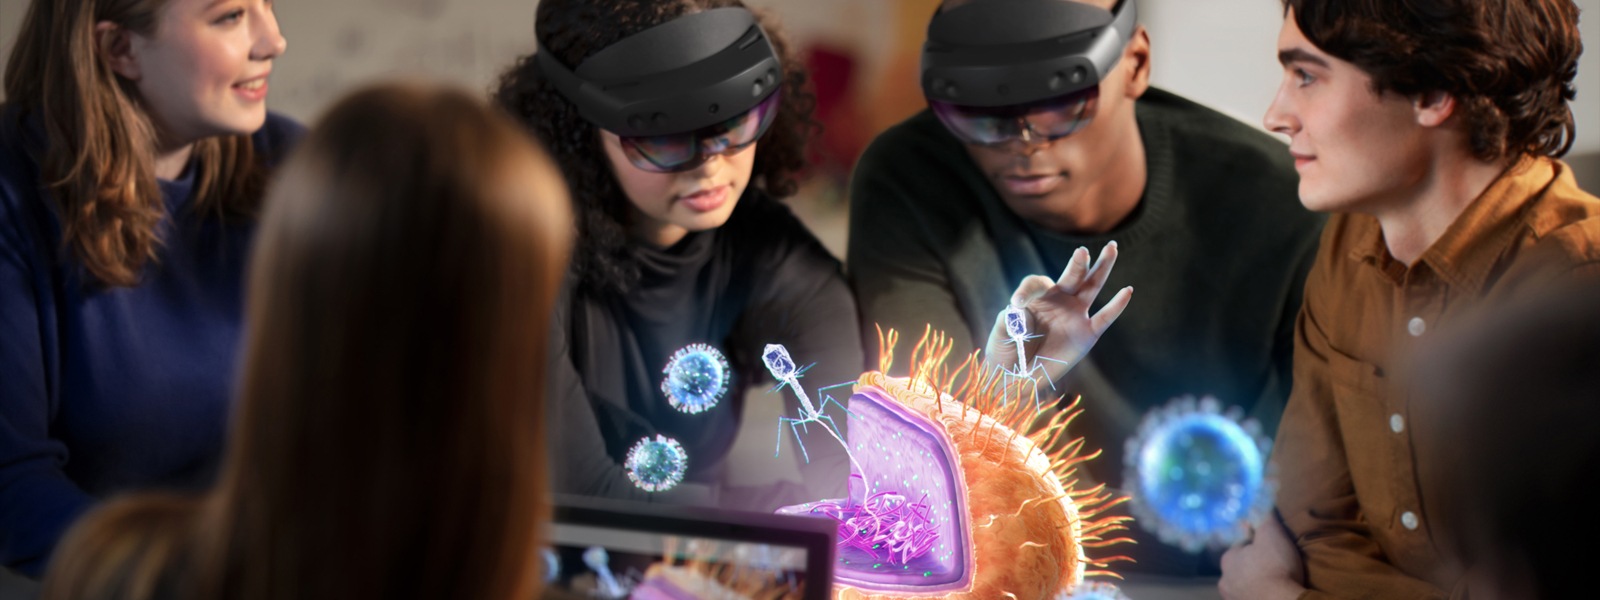 Three coworkers use HoloLens devices to observe the human brain.